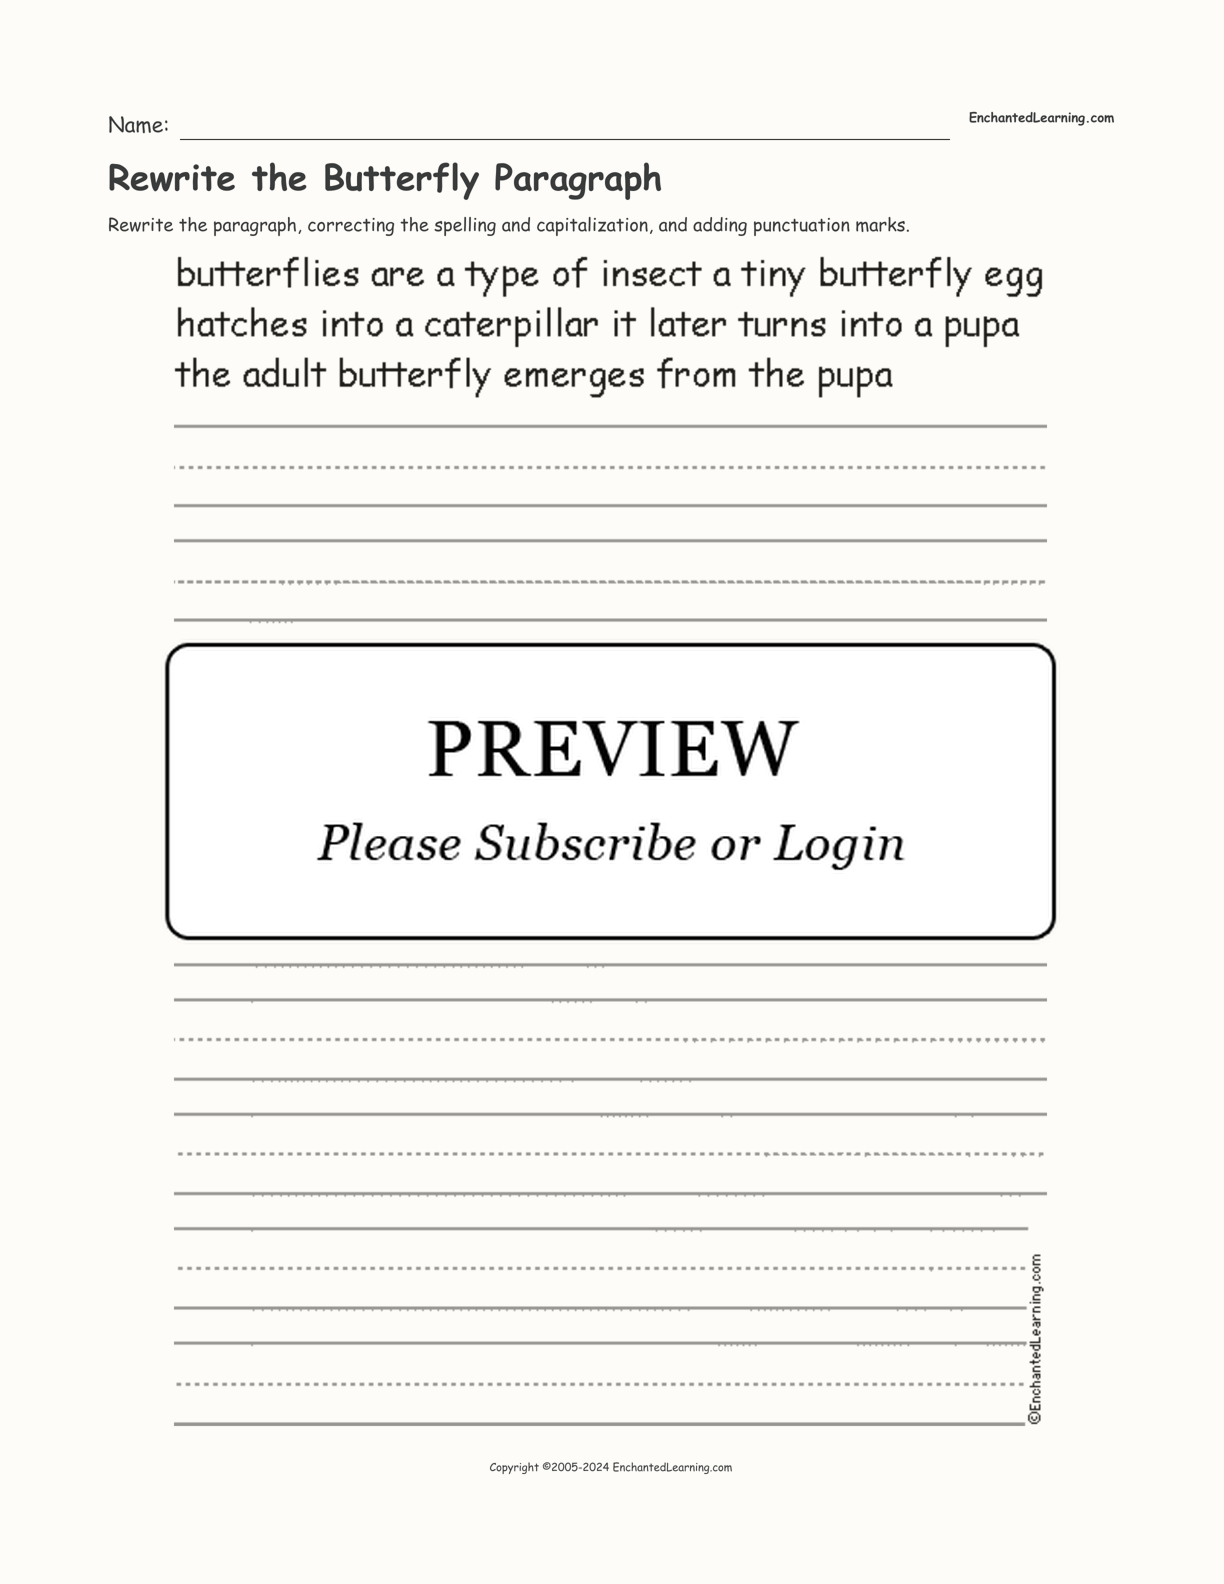 Rewrite the Butterfly Paragraph interactive worksheet page 1